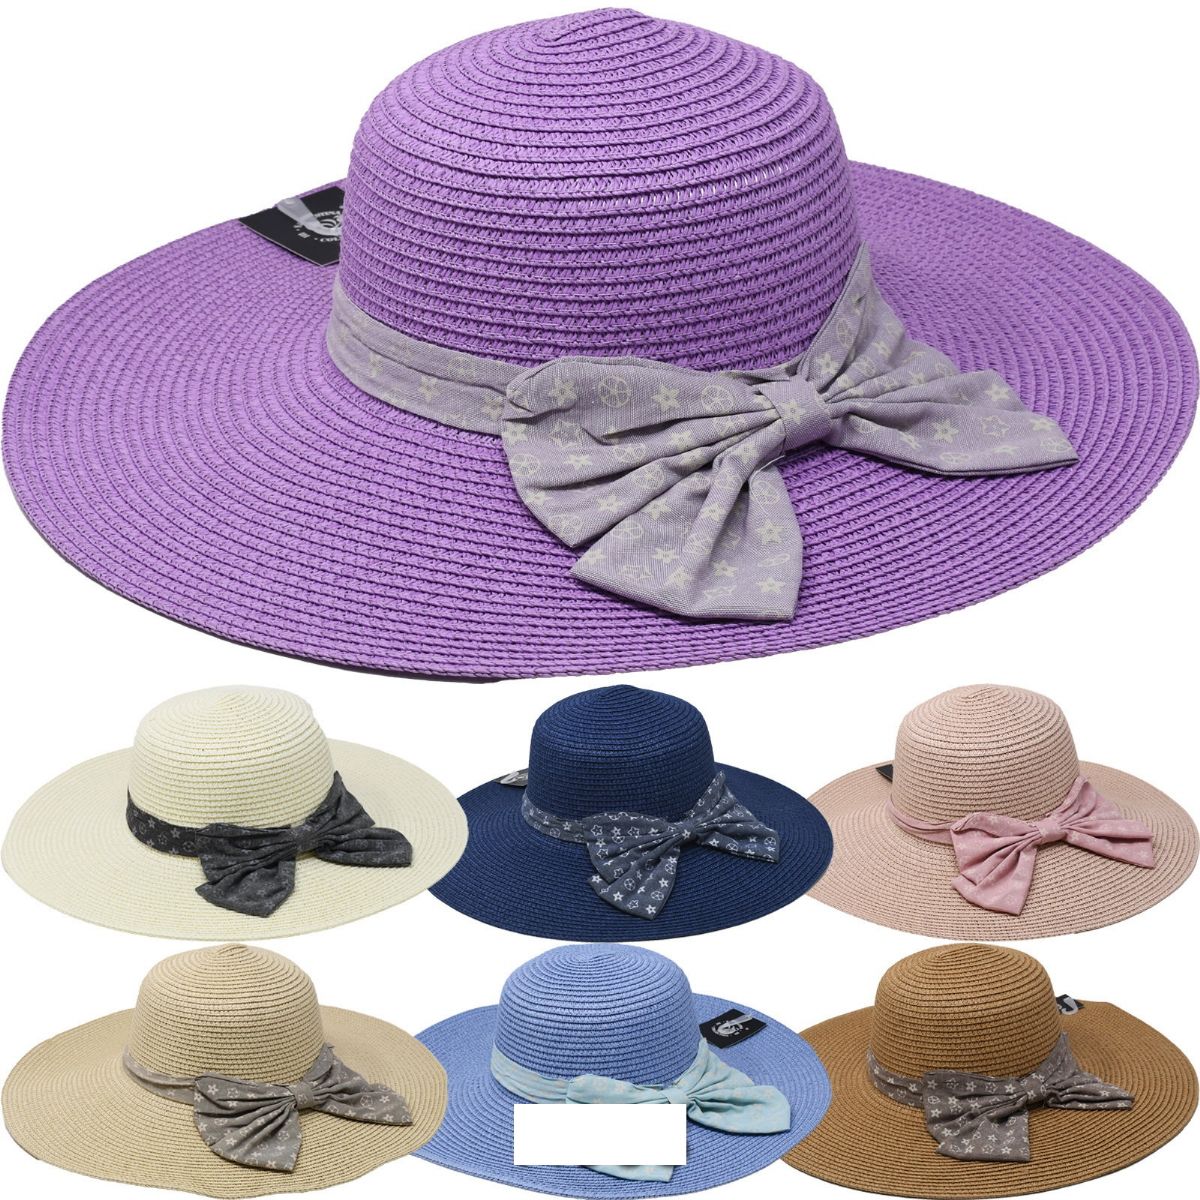 12 Pieces of Beach Hat With Fabric Band Wide